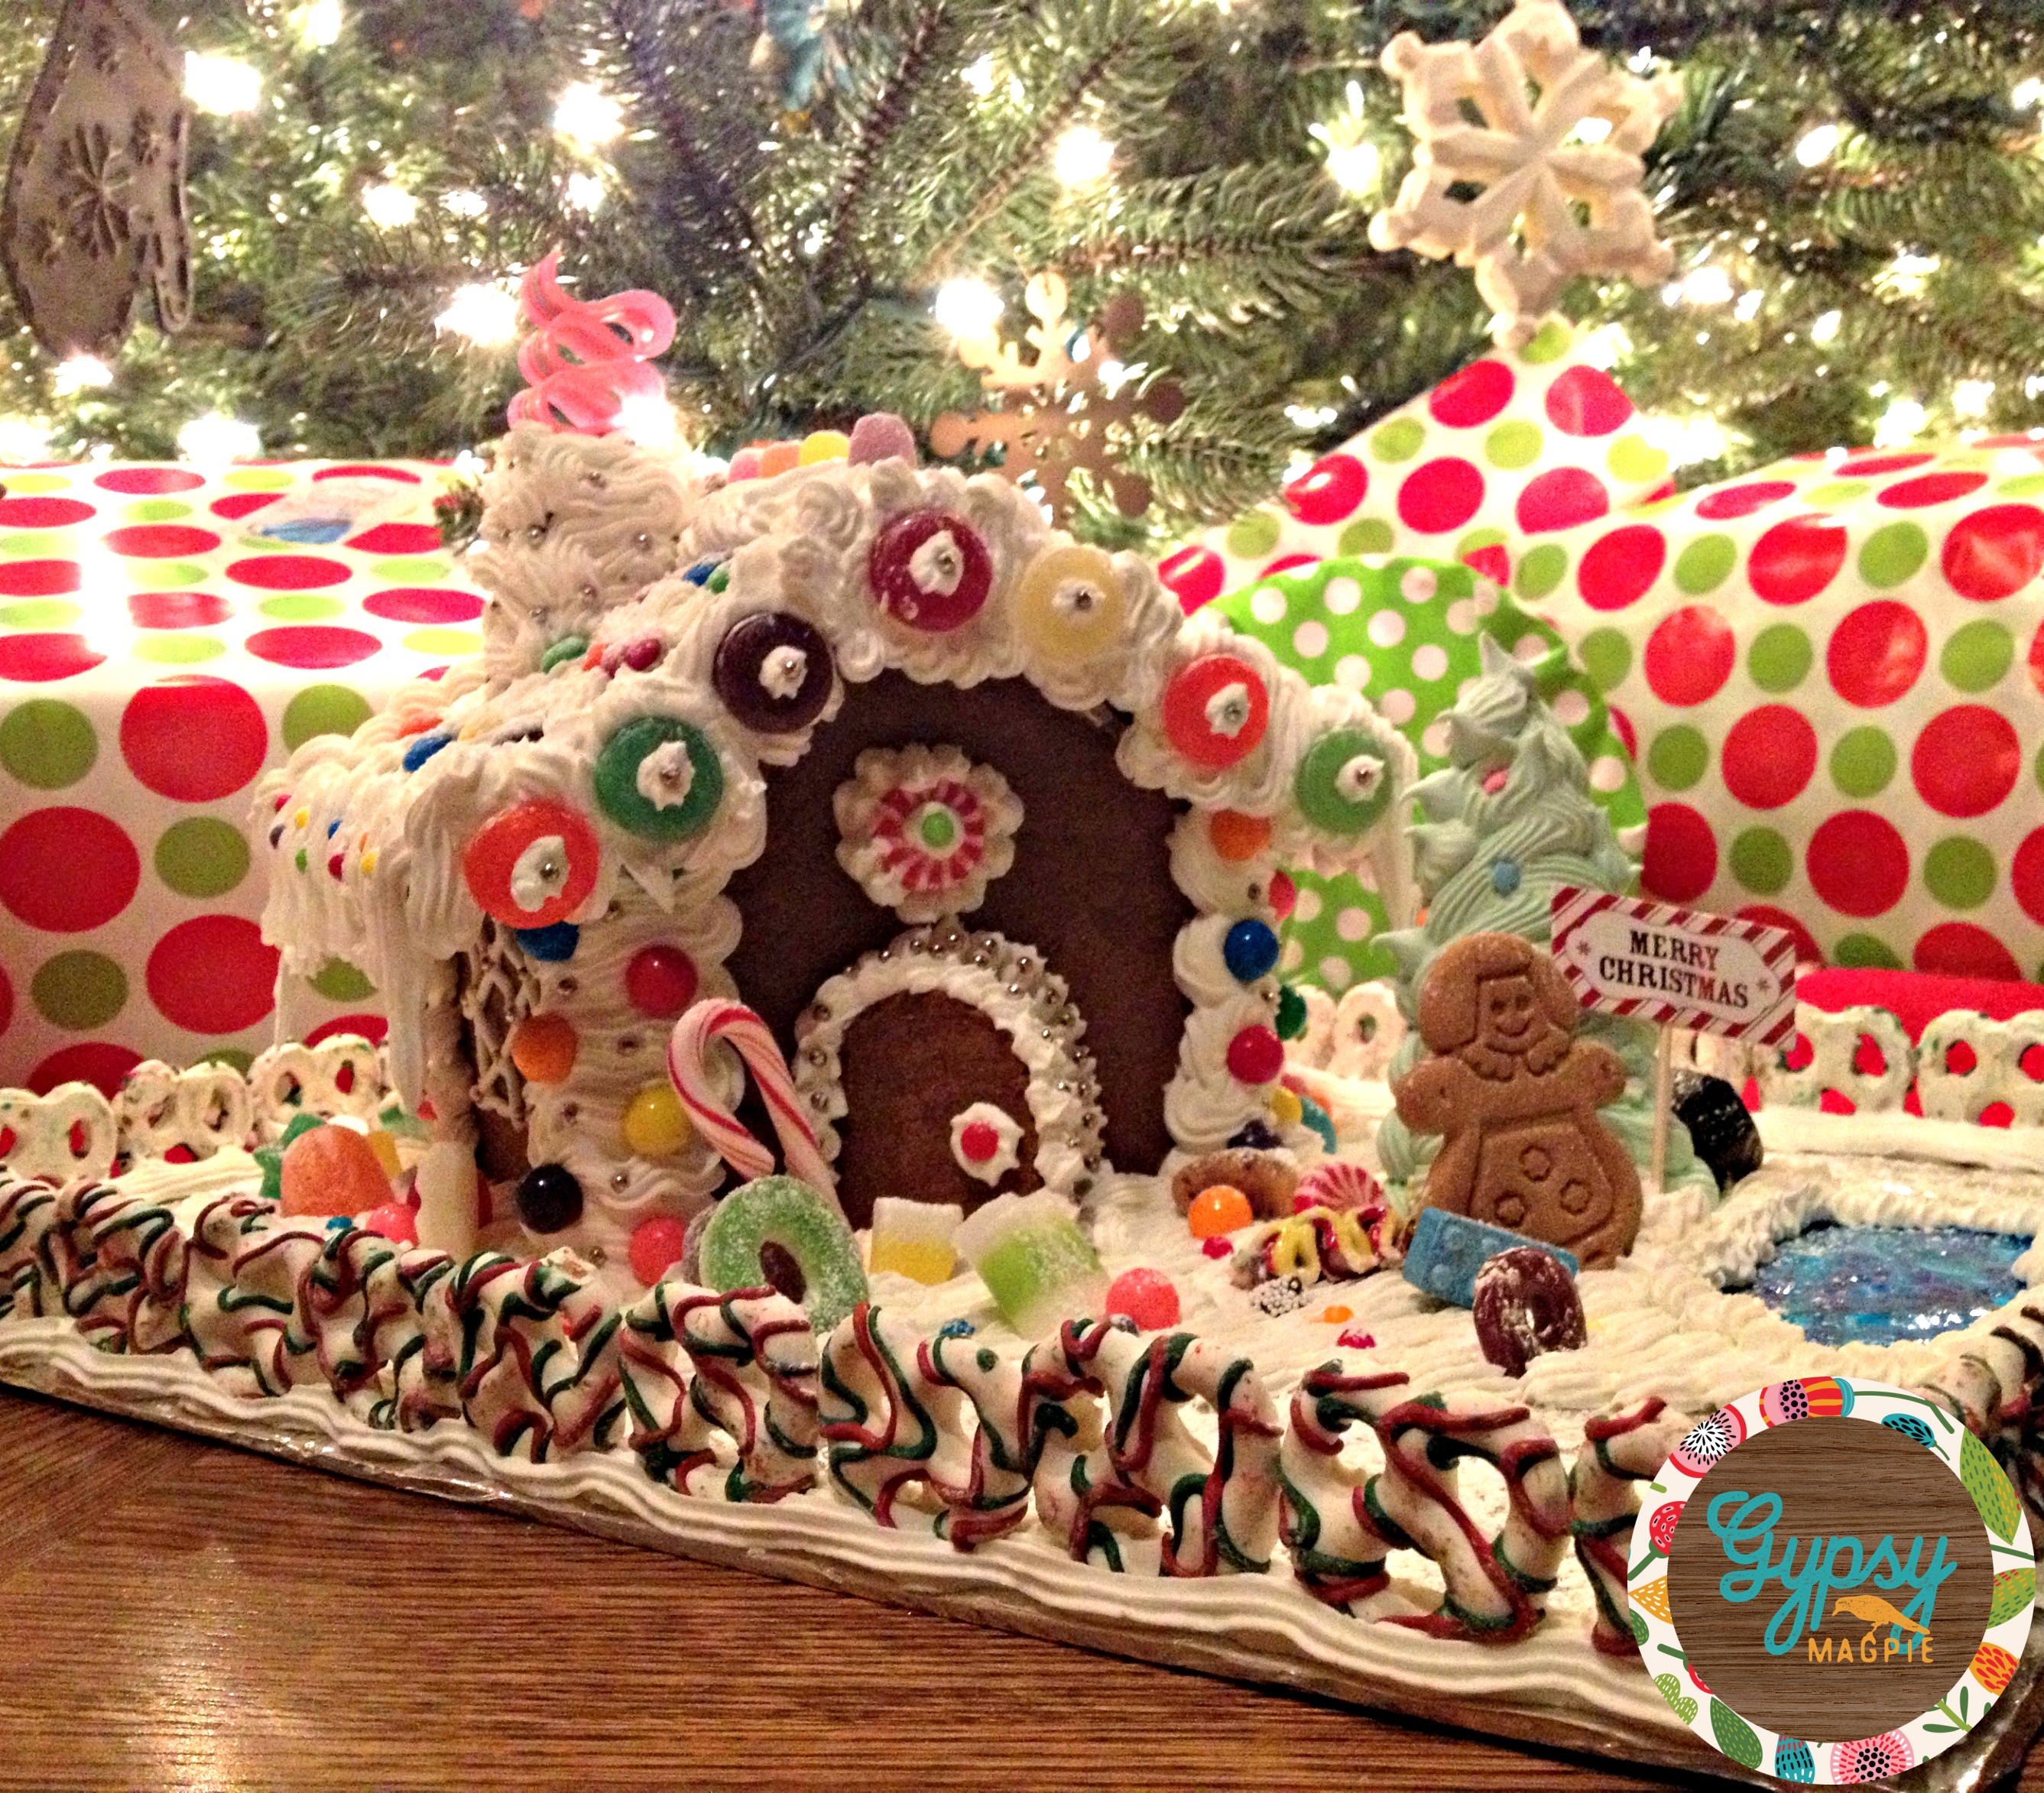 How to Make an Old Fashioned Gingerbread House